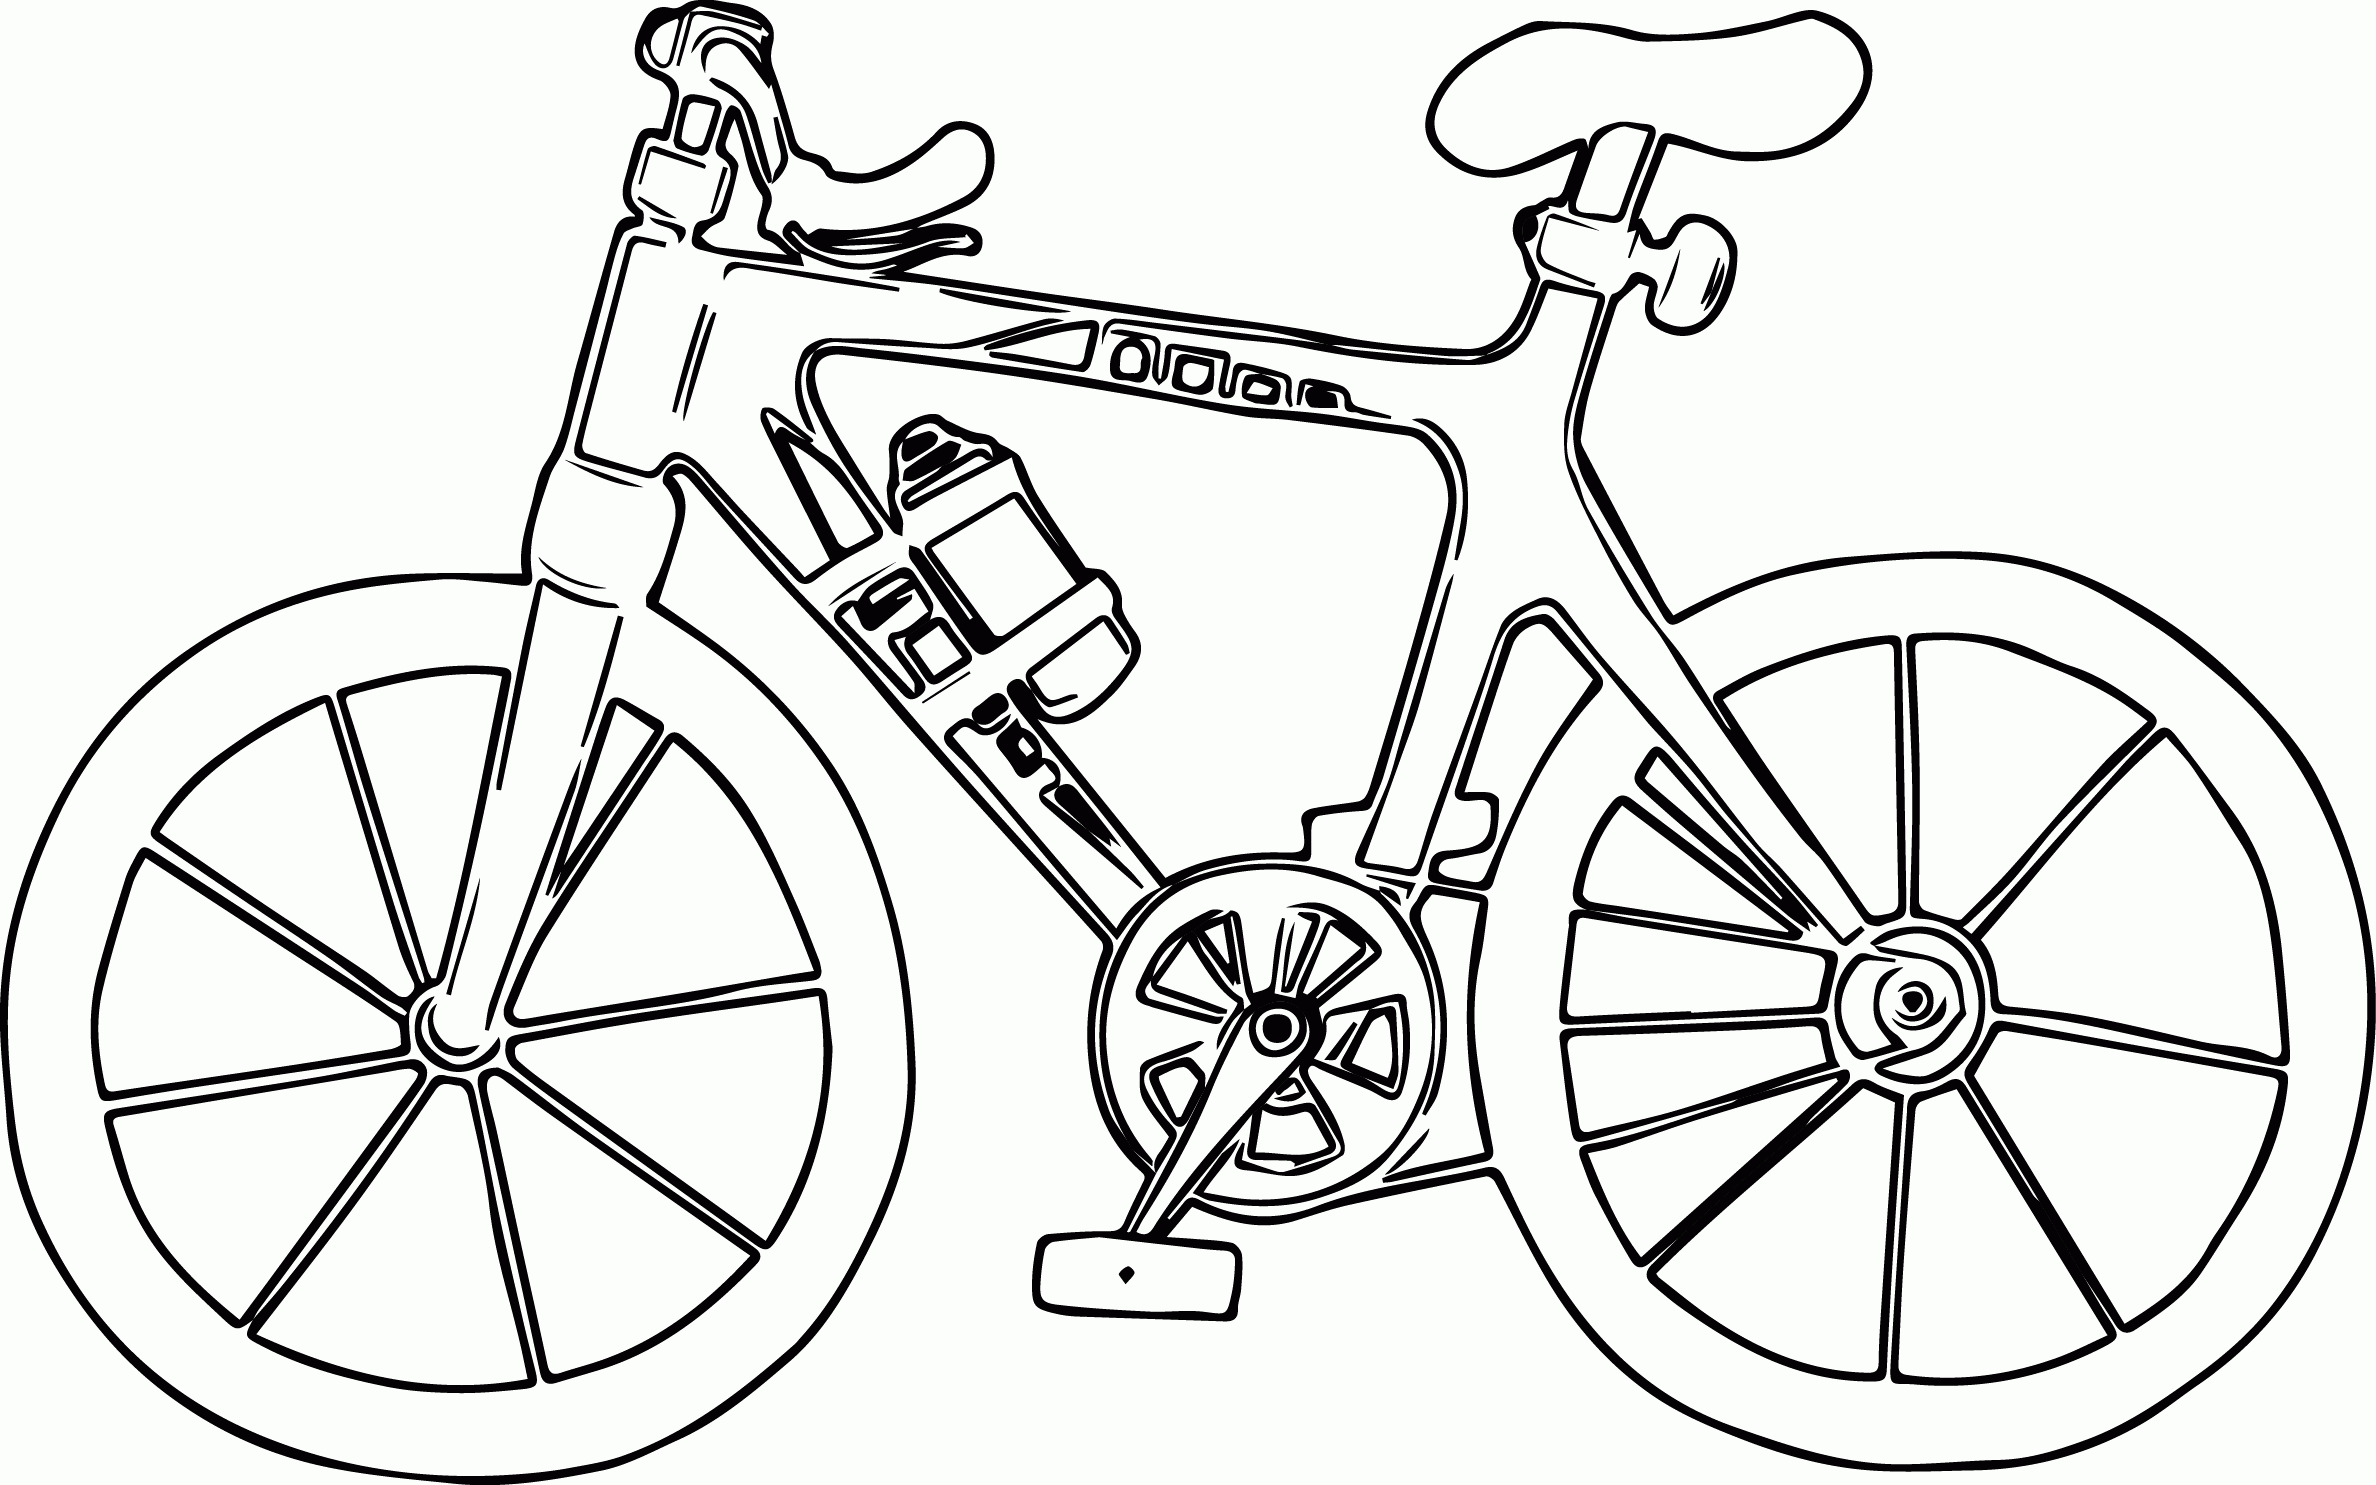 Bike Coloring Page - Coloring Home